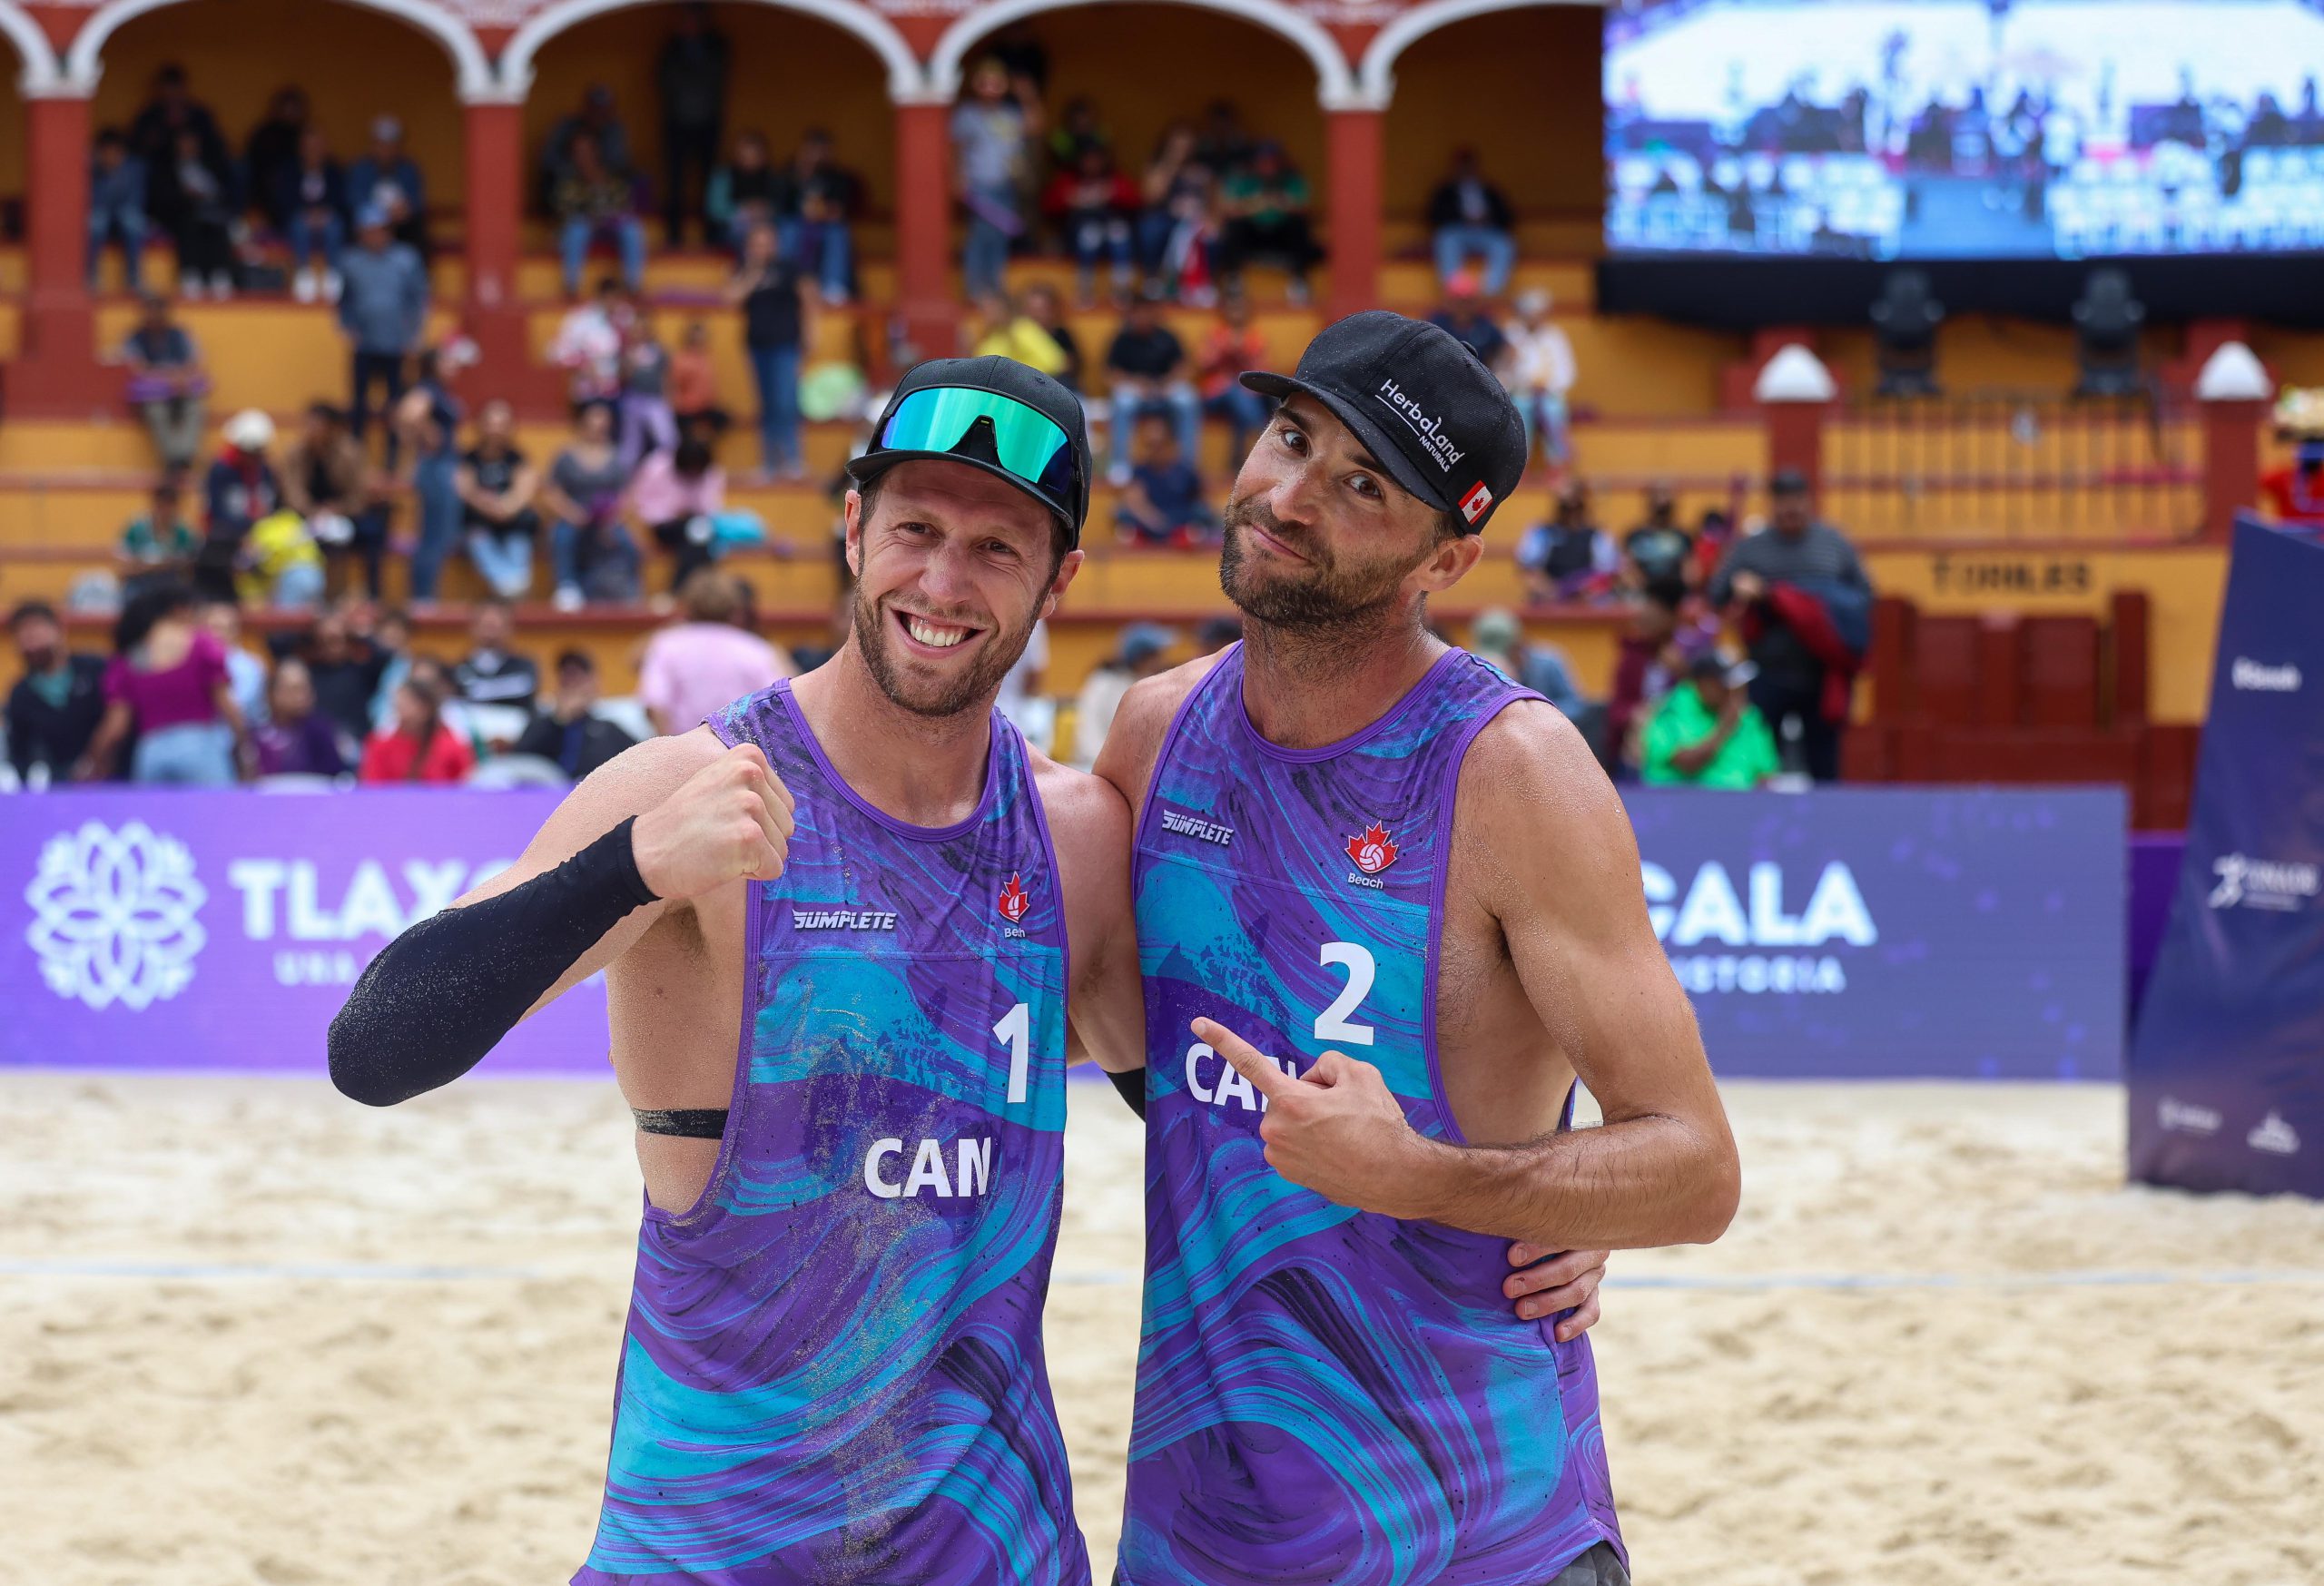 Schachter and Dearing of Canada Win NORCECA Olympic Ticket